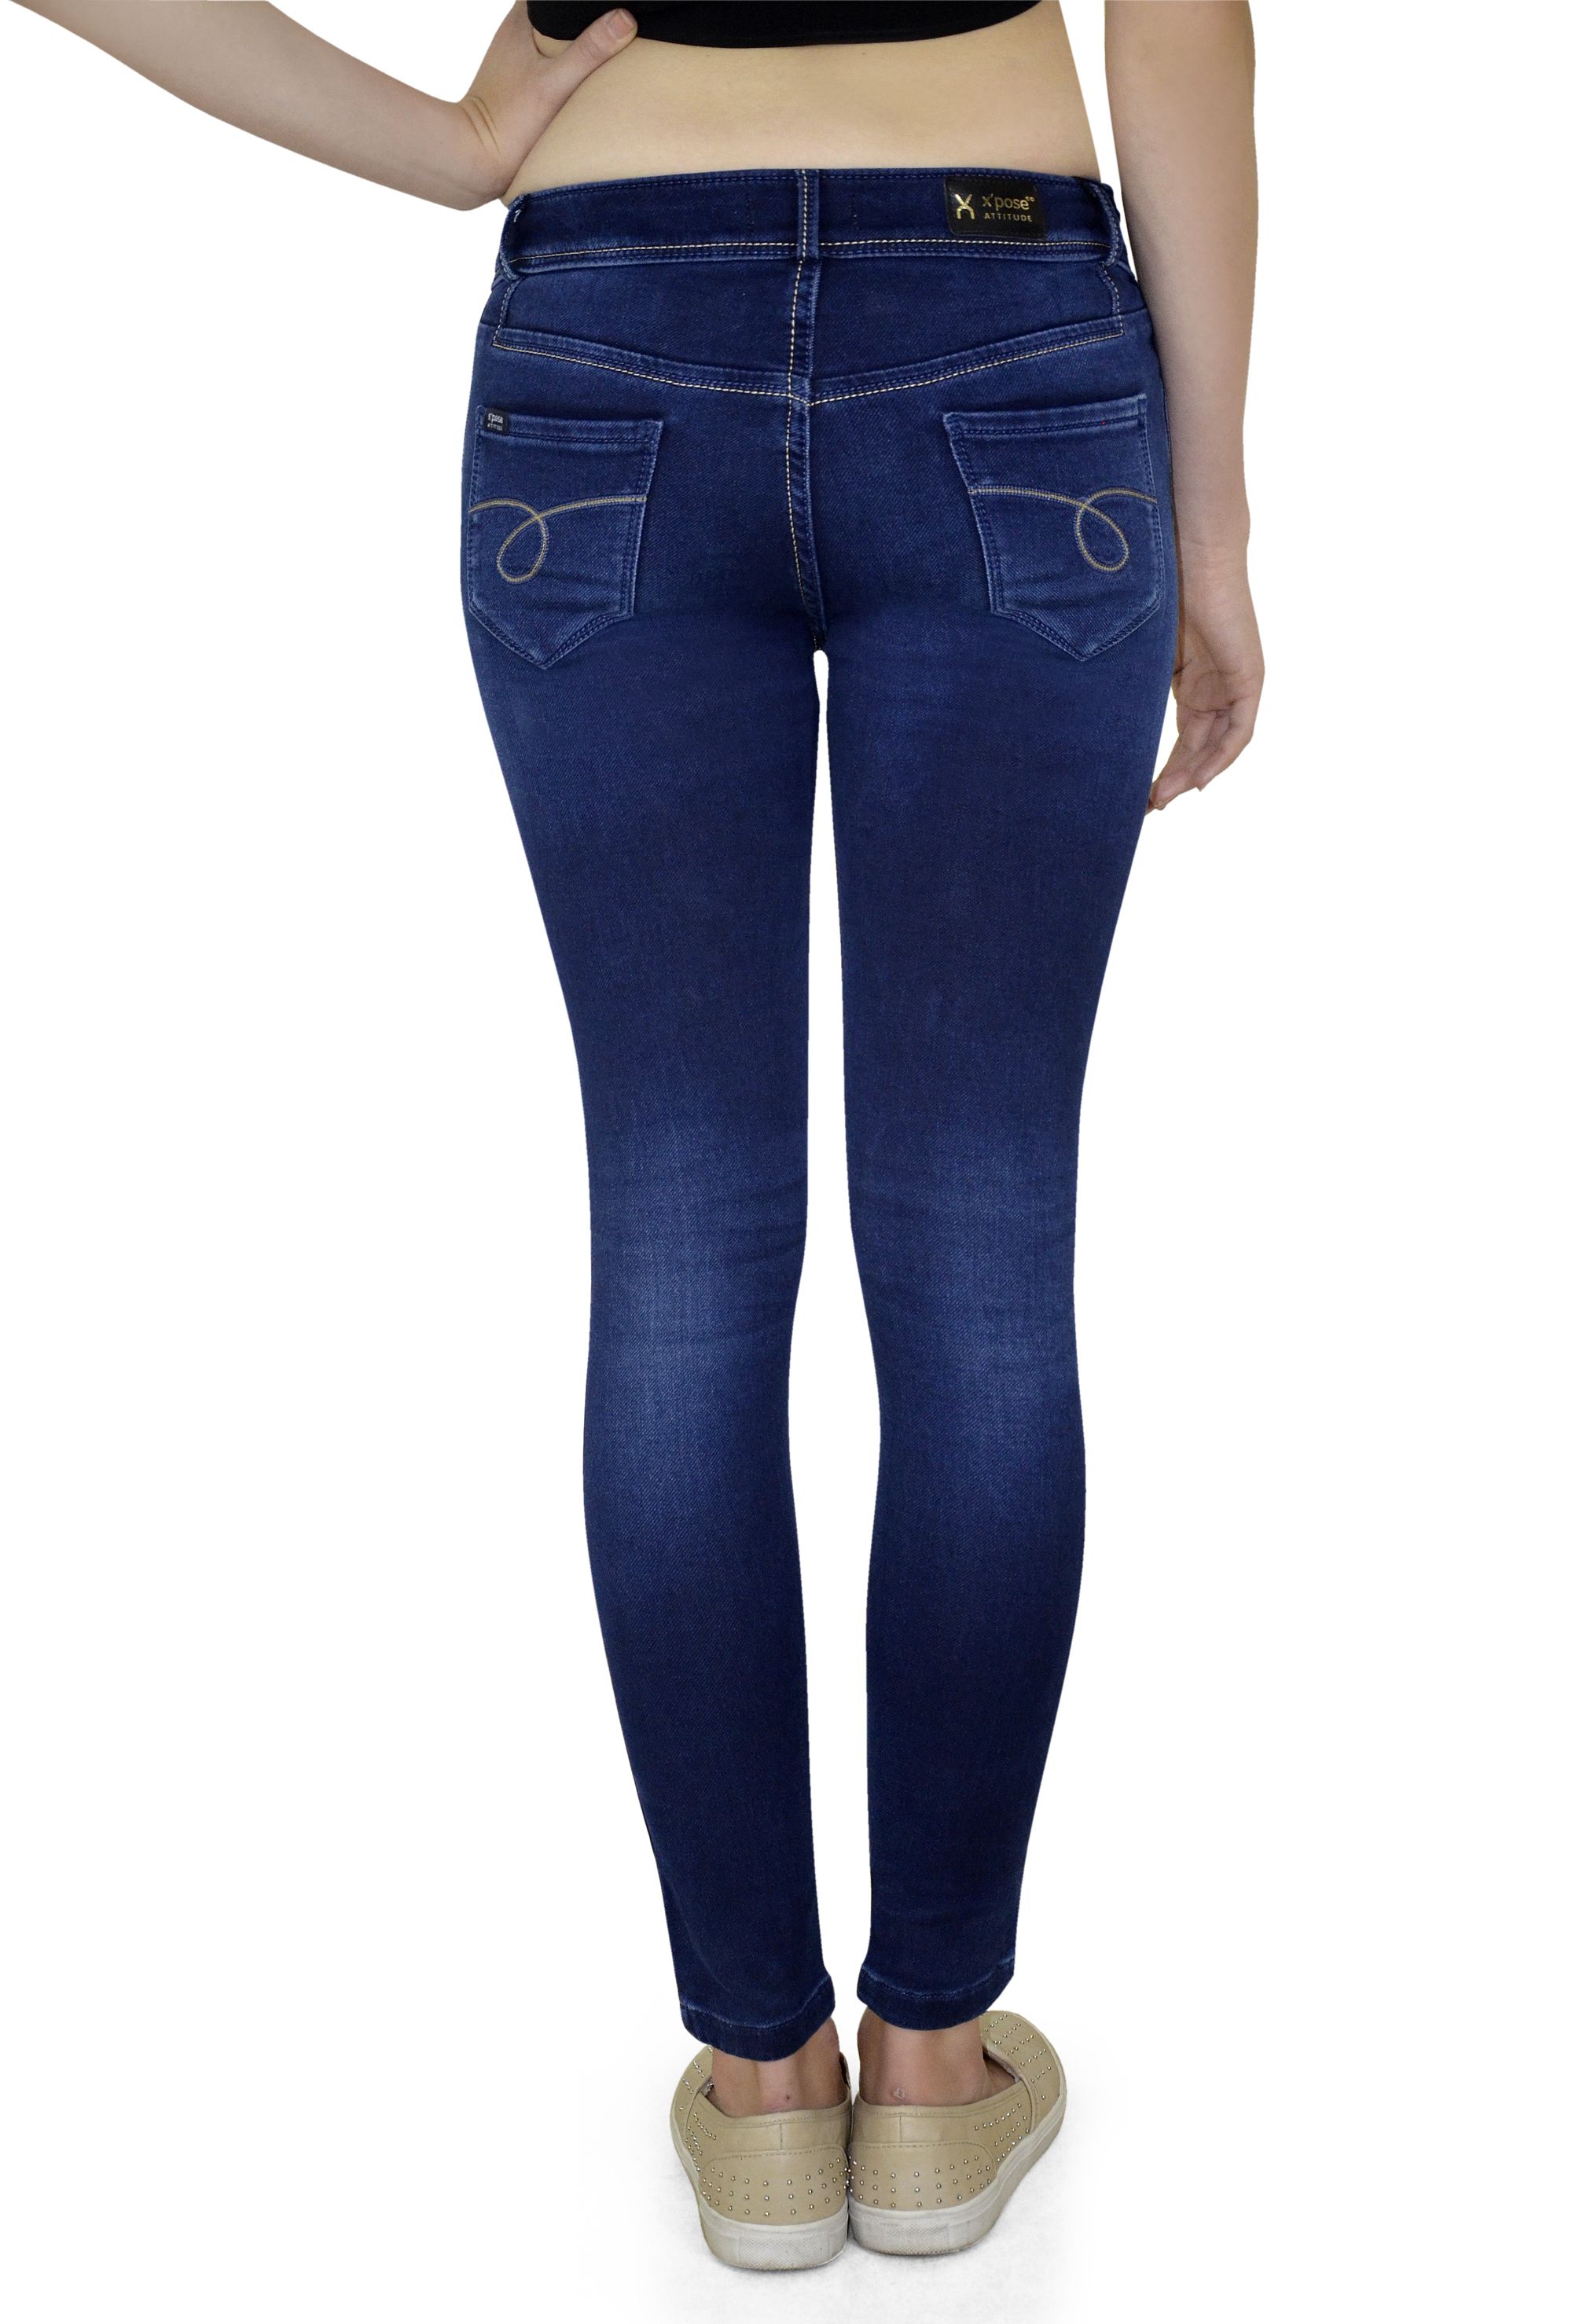 xpose jeans online